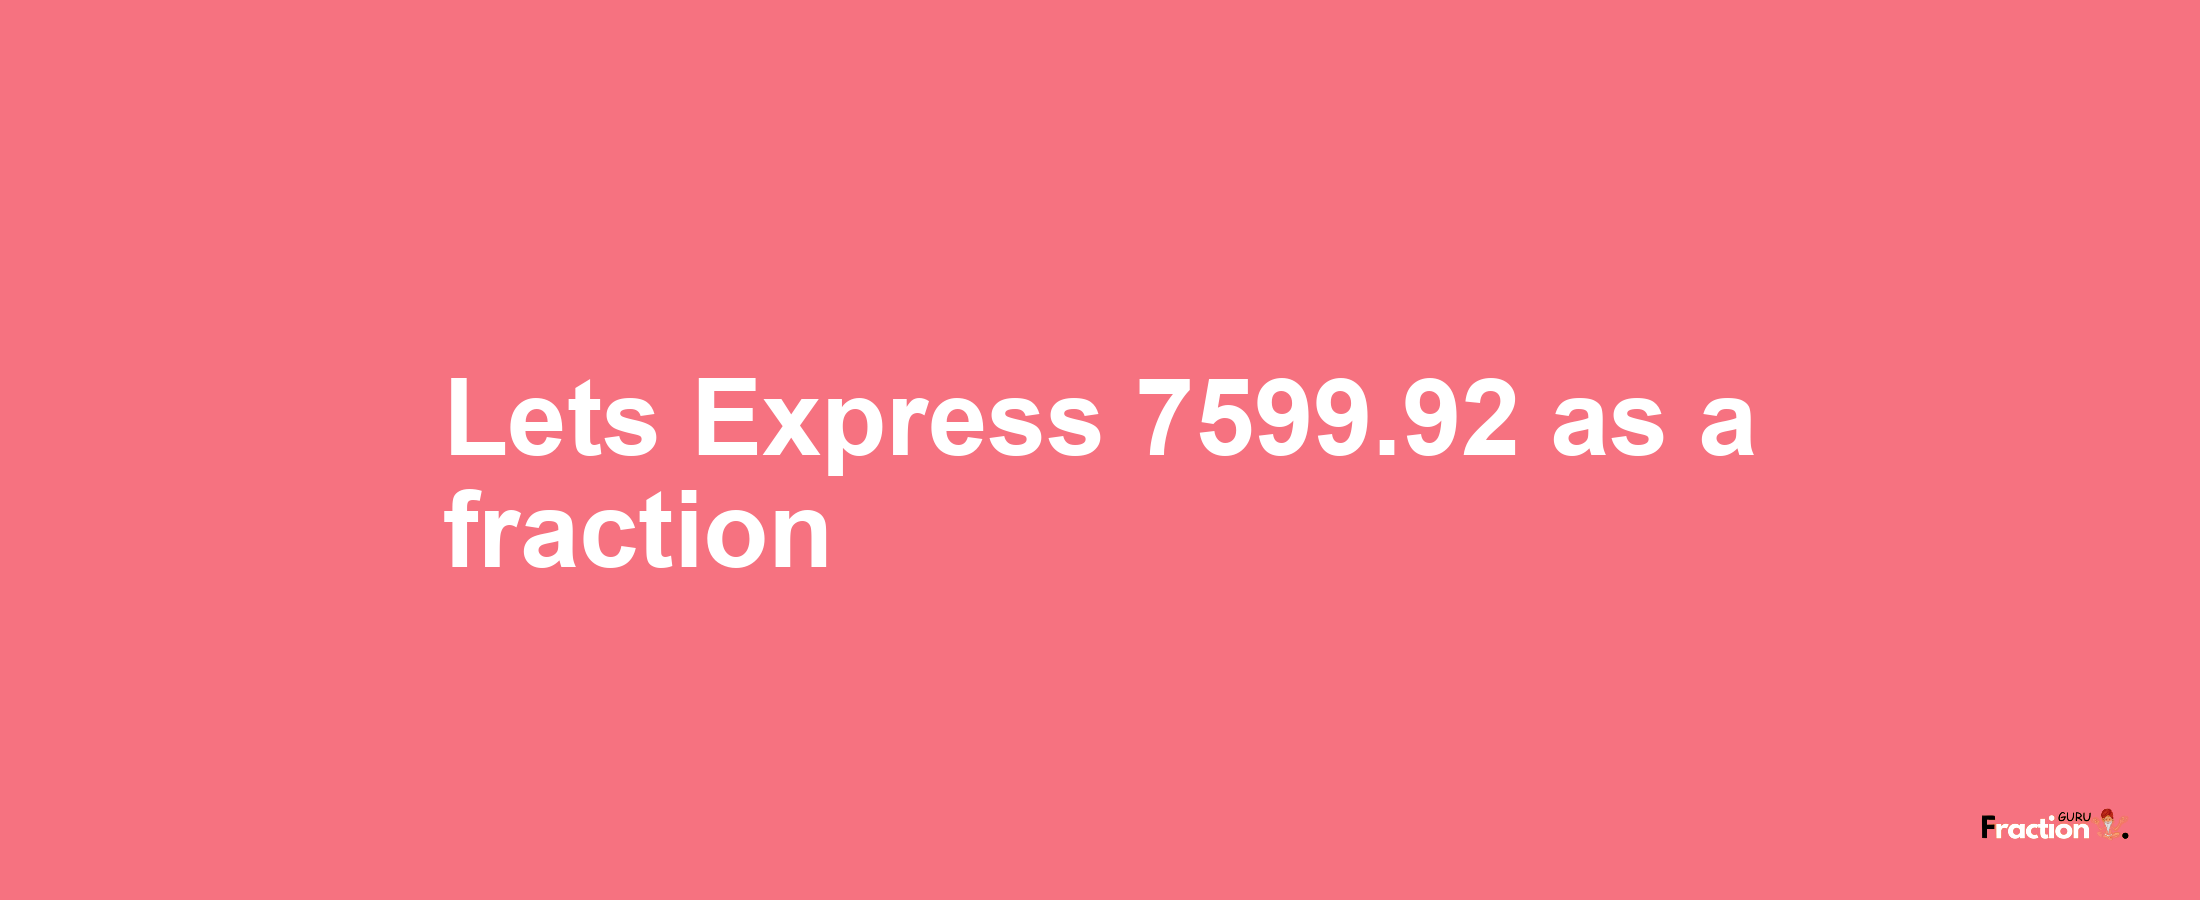 Lets Express 7599.92 as afraction